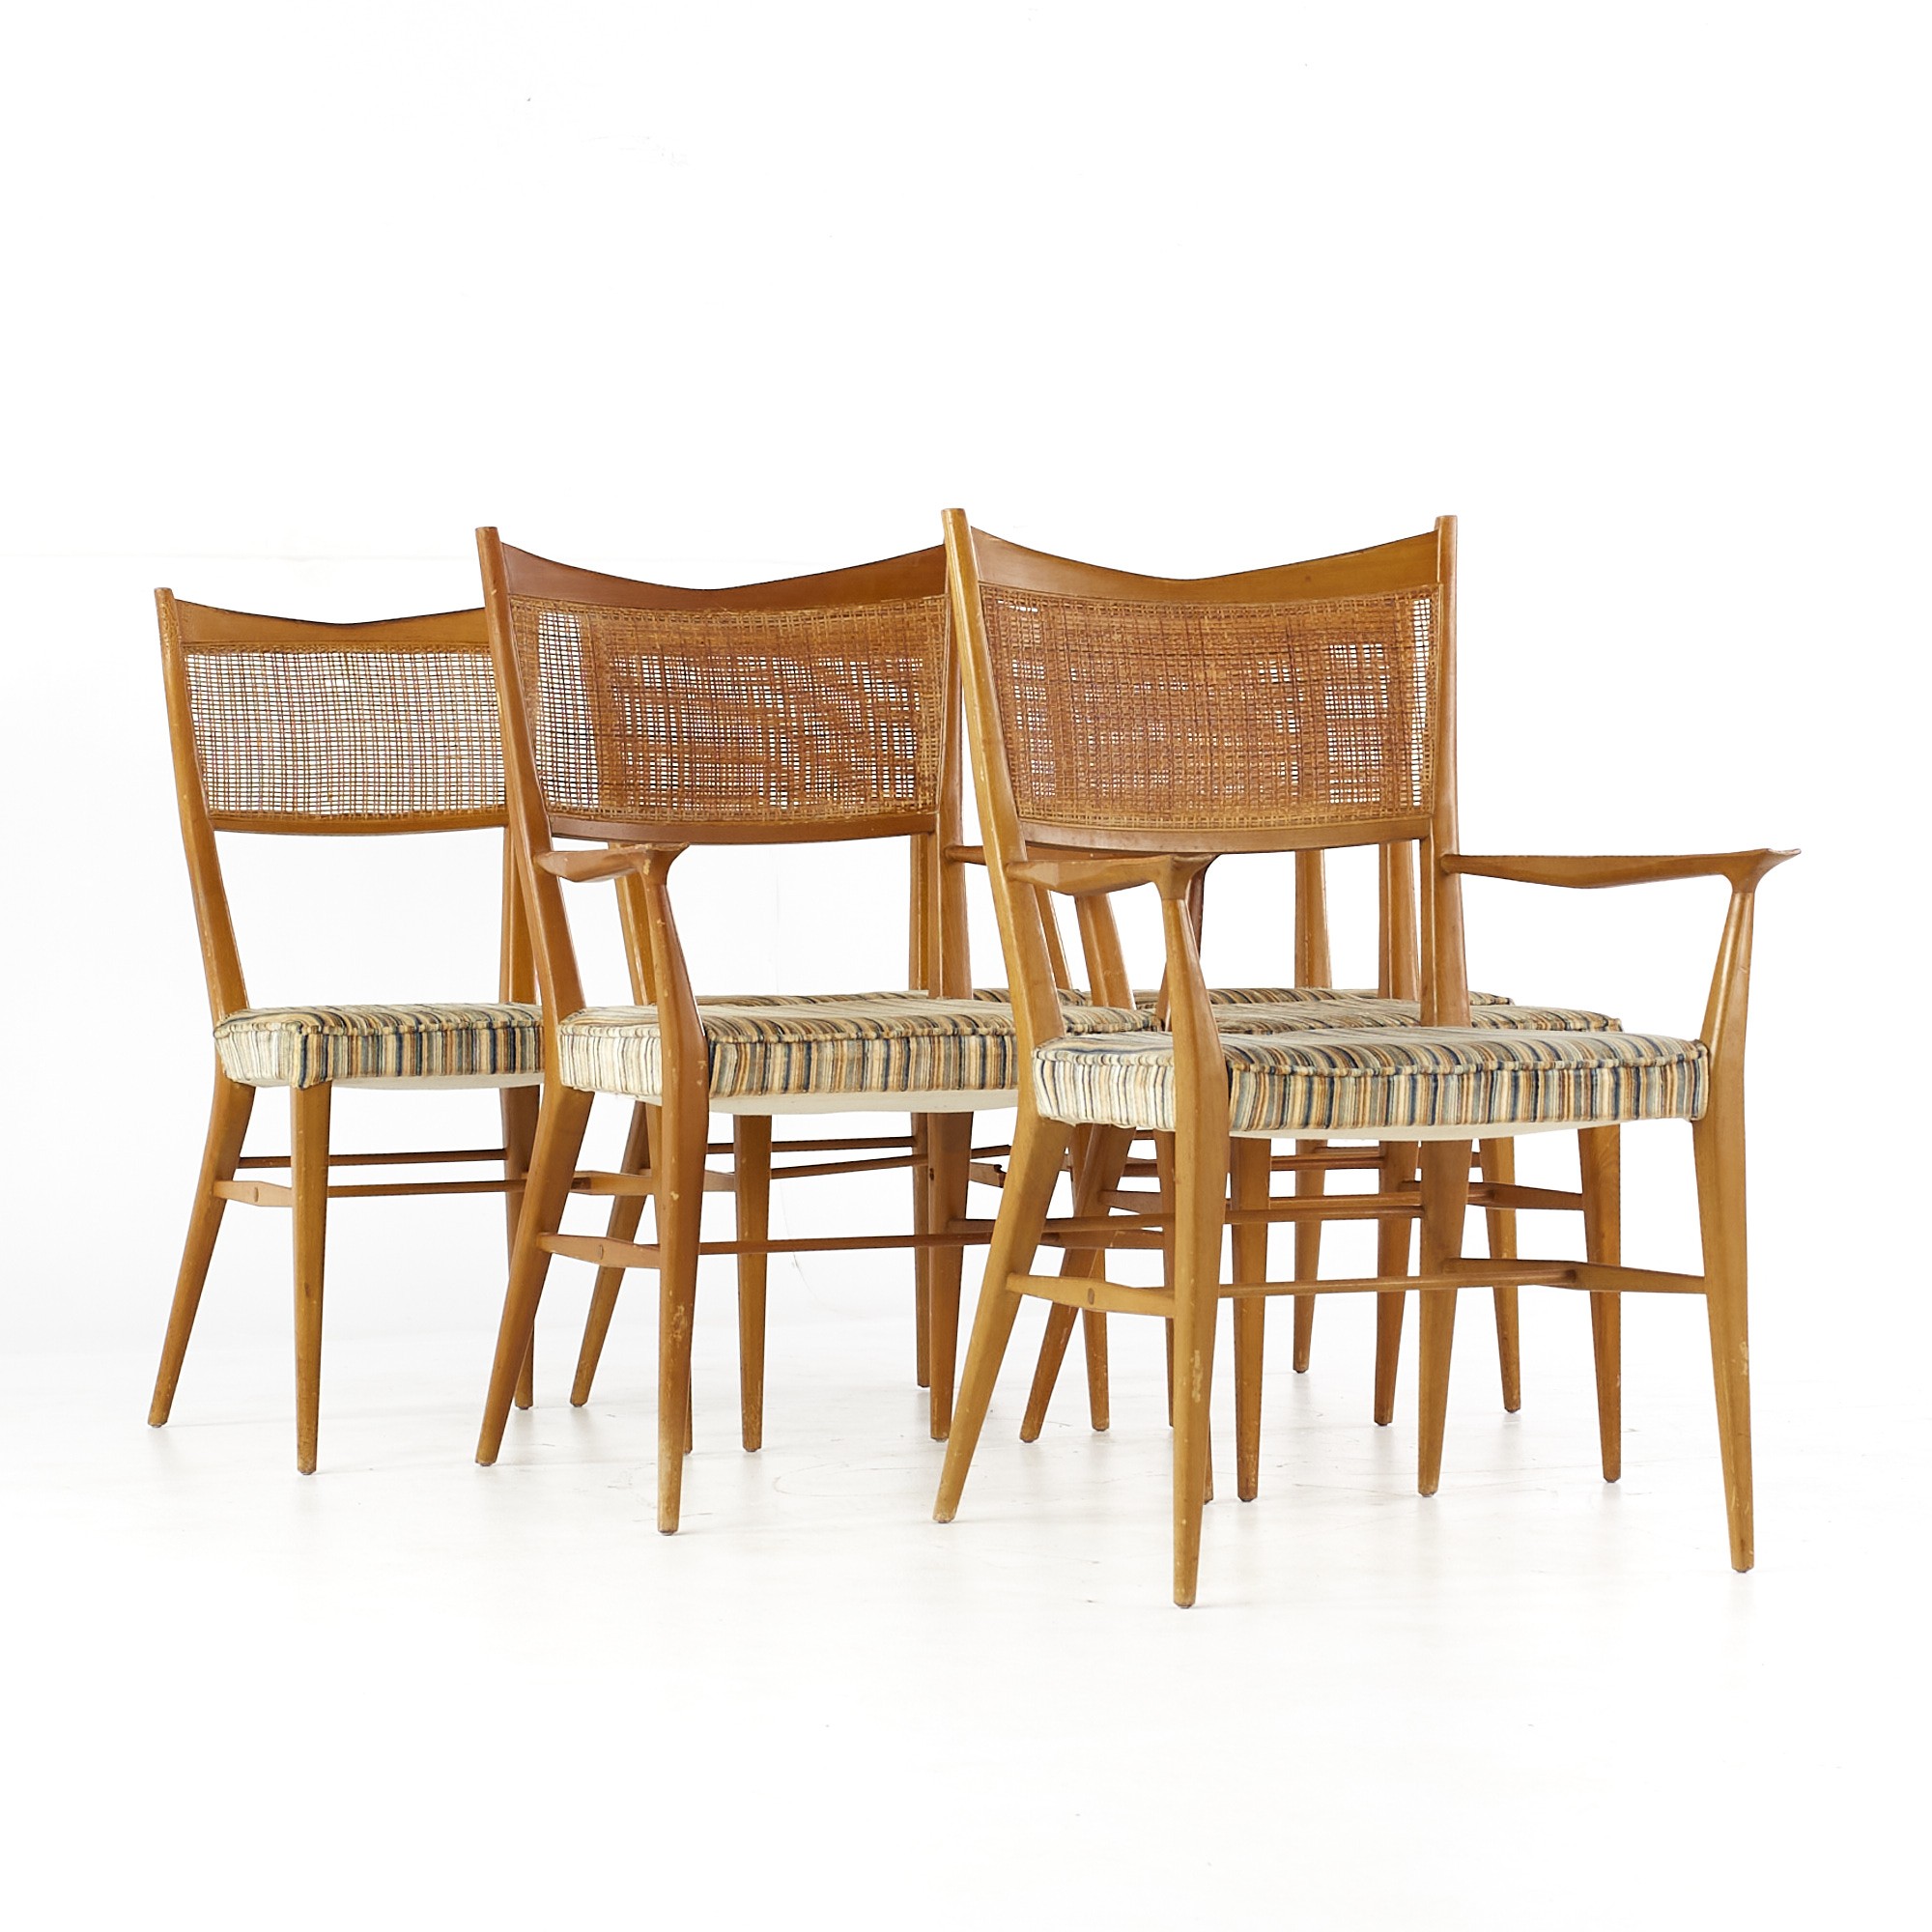 Paul Mccobb for Directional Mid Century Walnut and Cane Dining Chairs - Set of 6